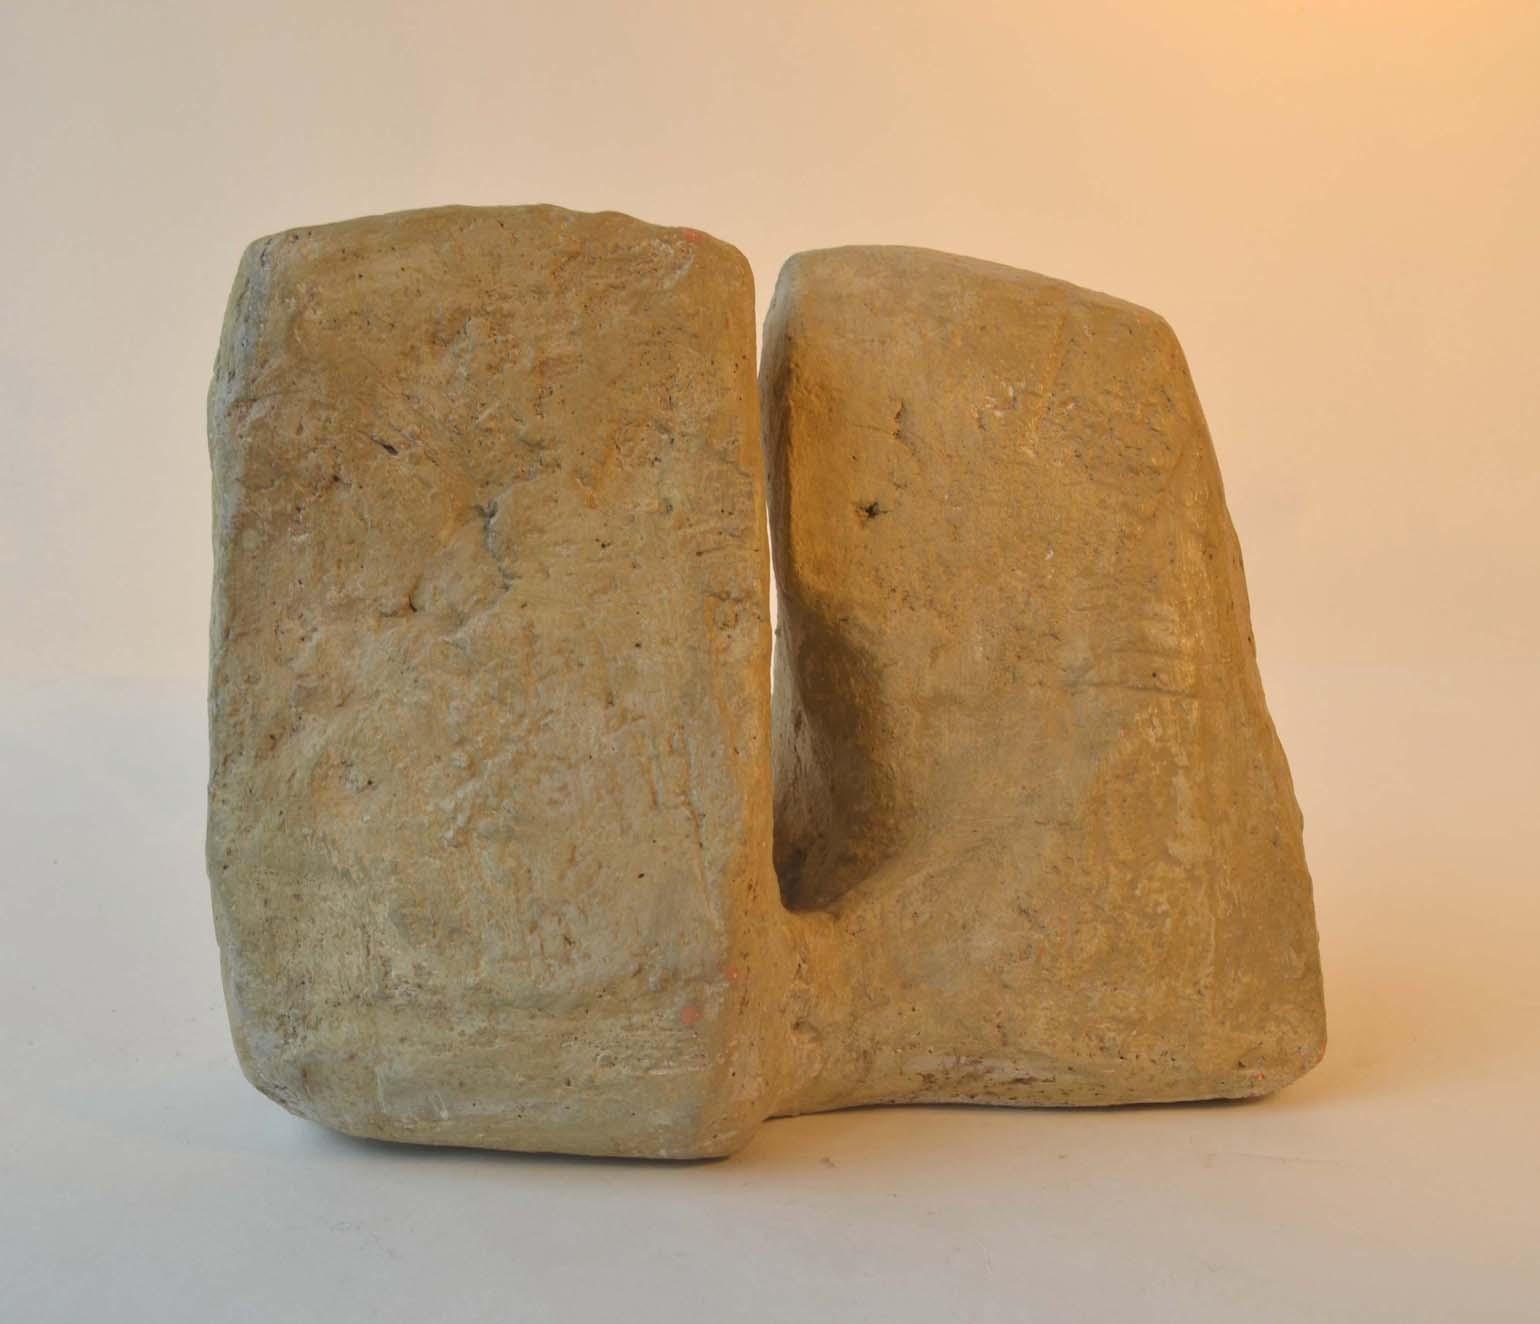 Hand-Crafted Abstract Sculpture by Bryan Blow Based on Sandstone Rocks